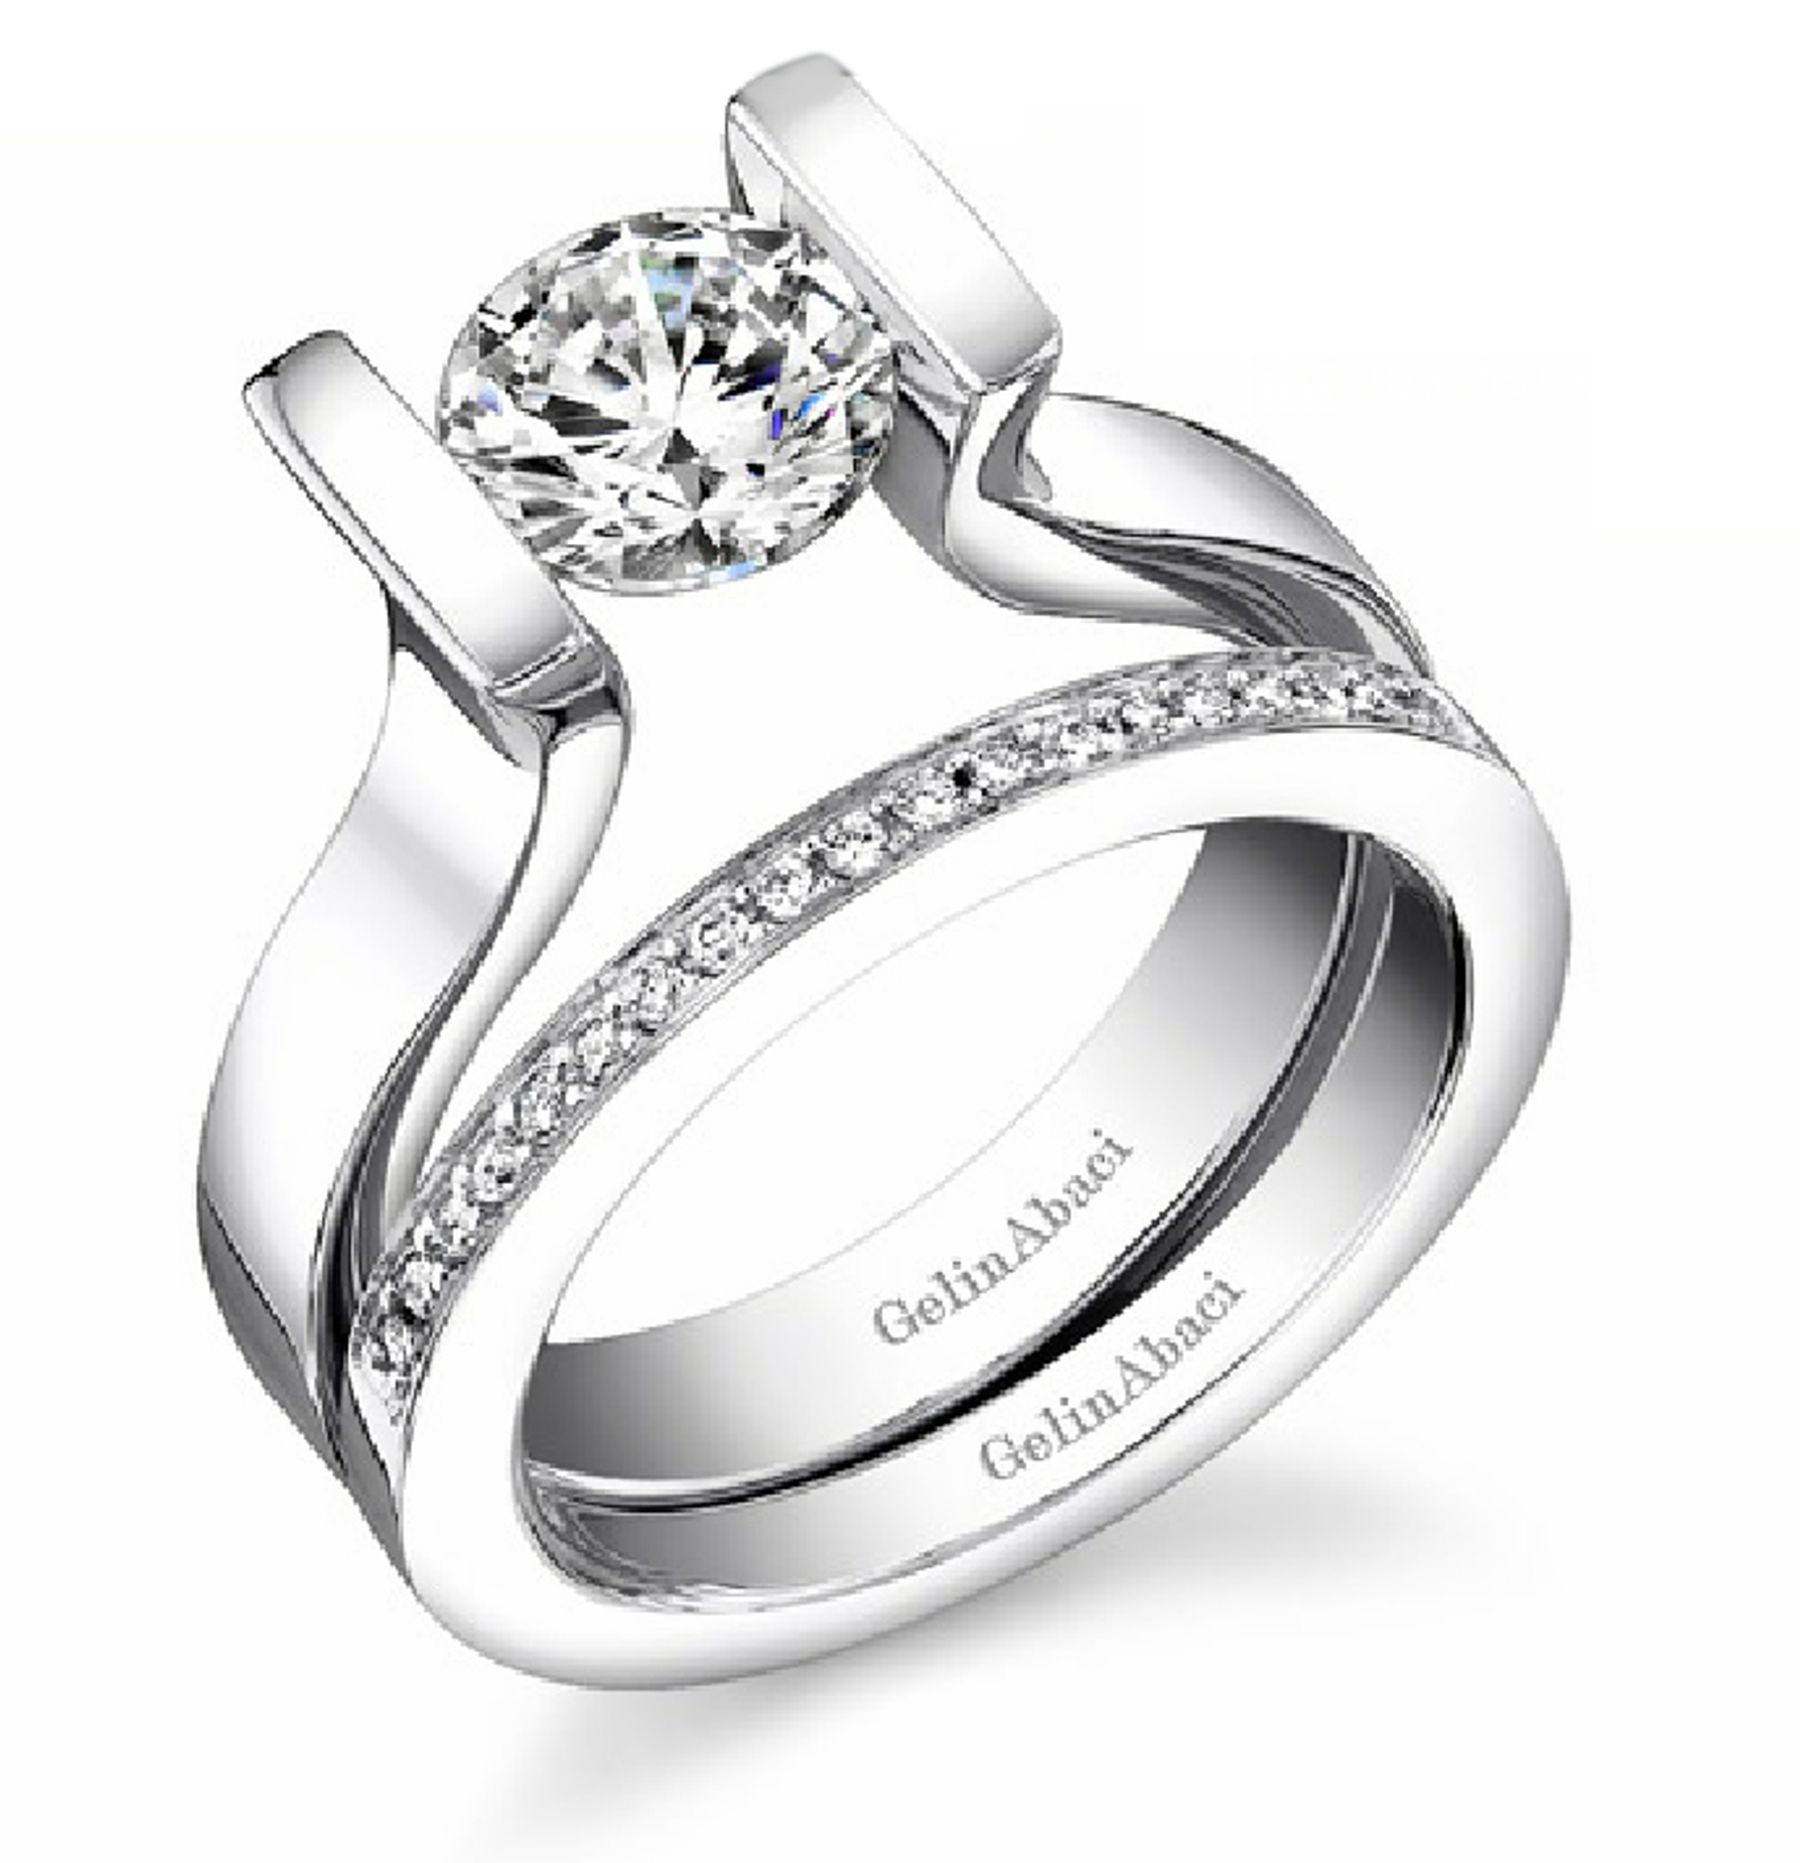 Designer Jewelry: Tension Set Diamond Engagement Rings in Sizes 3 to 8